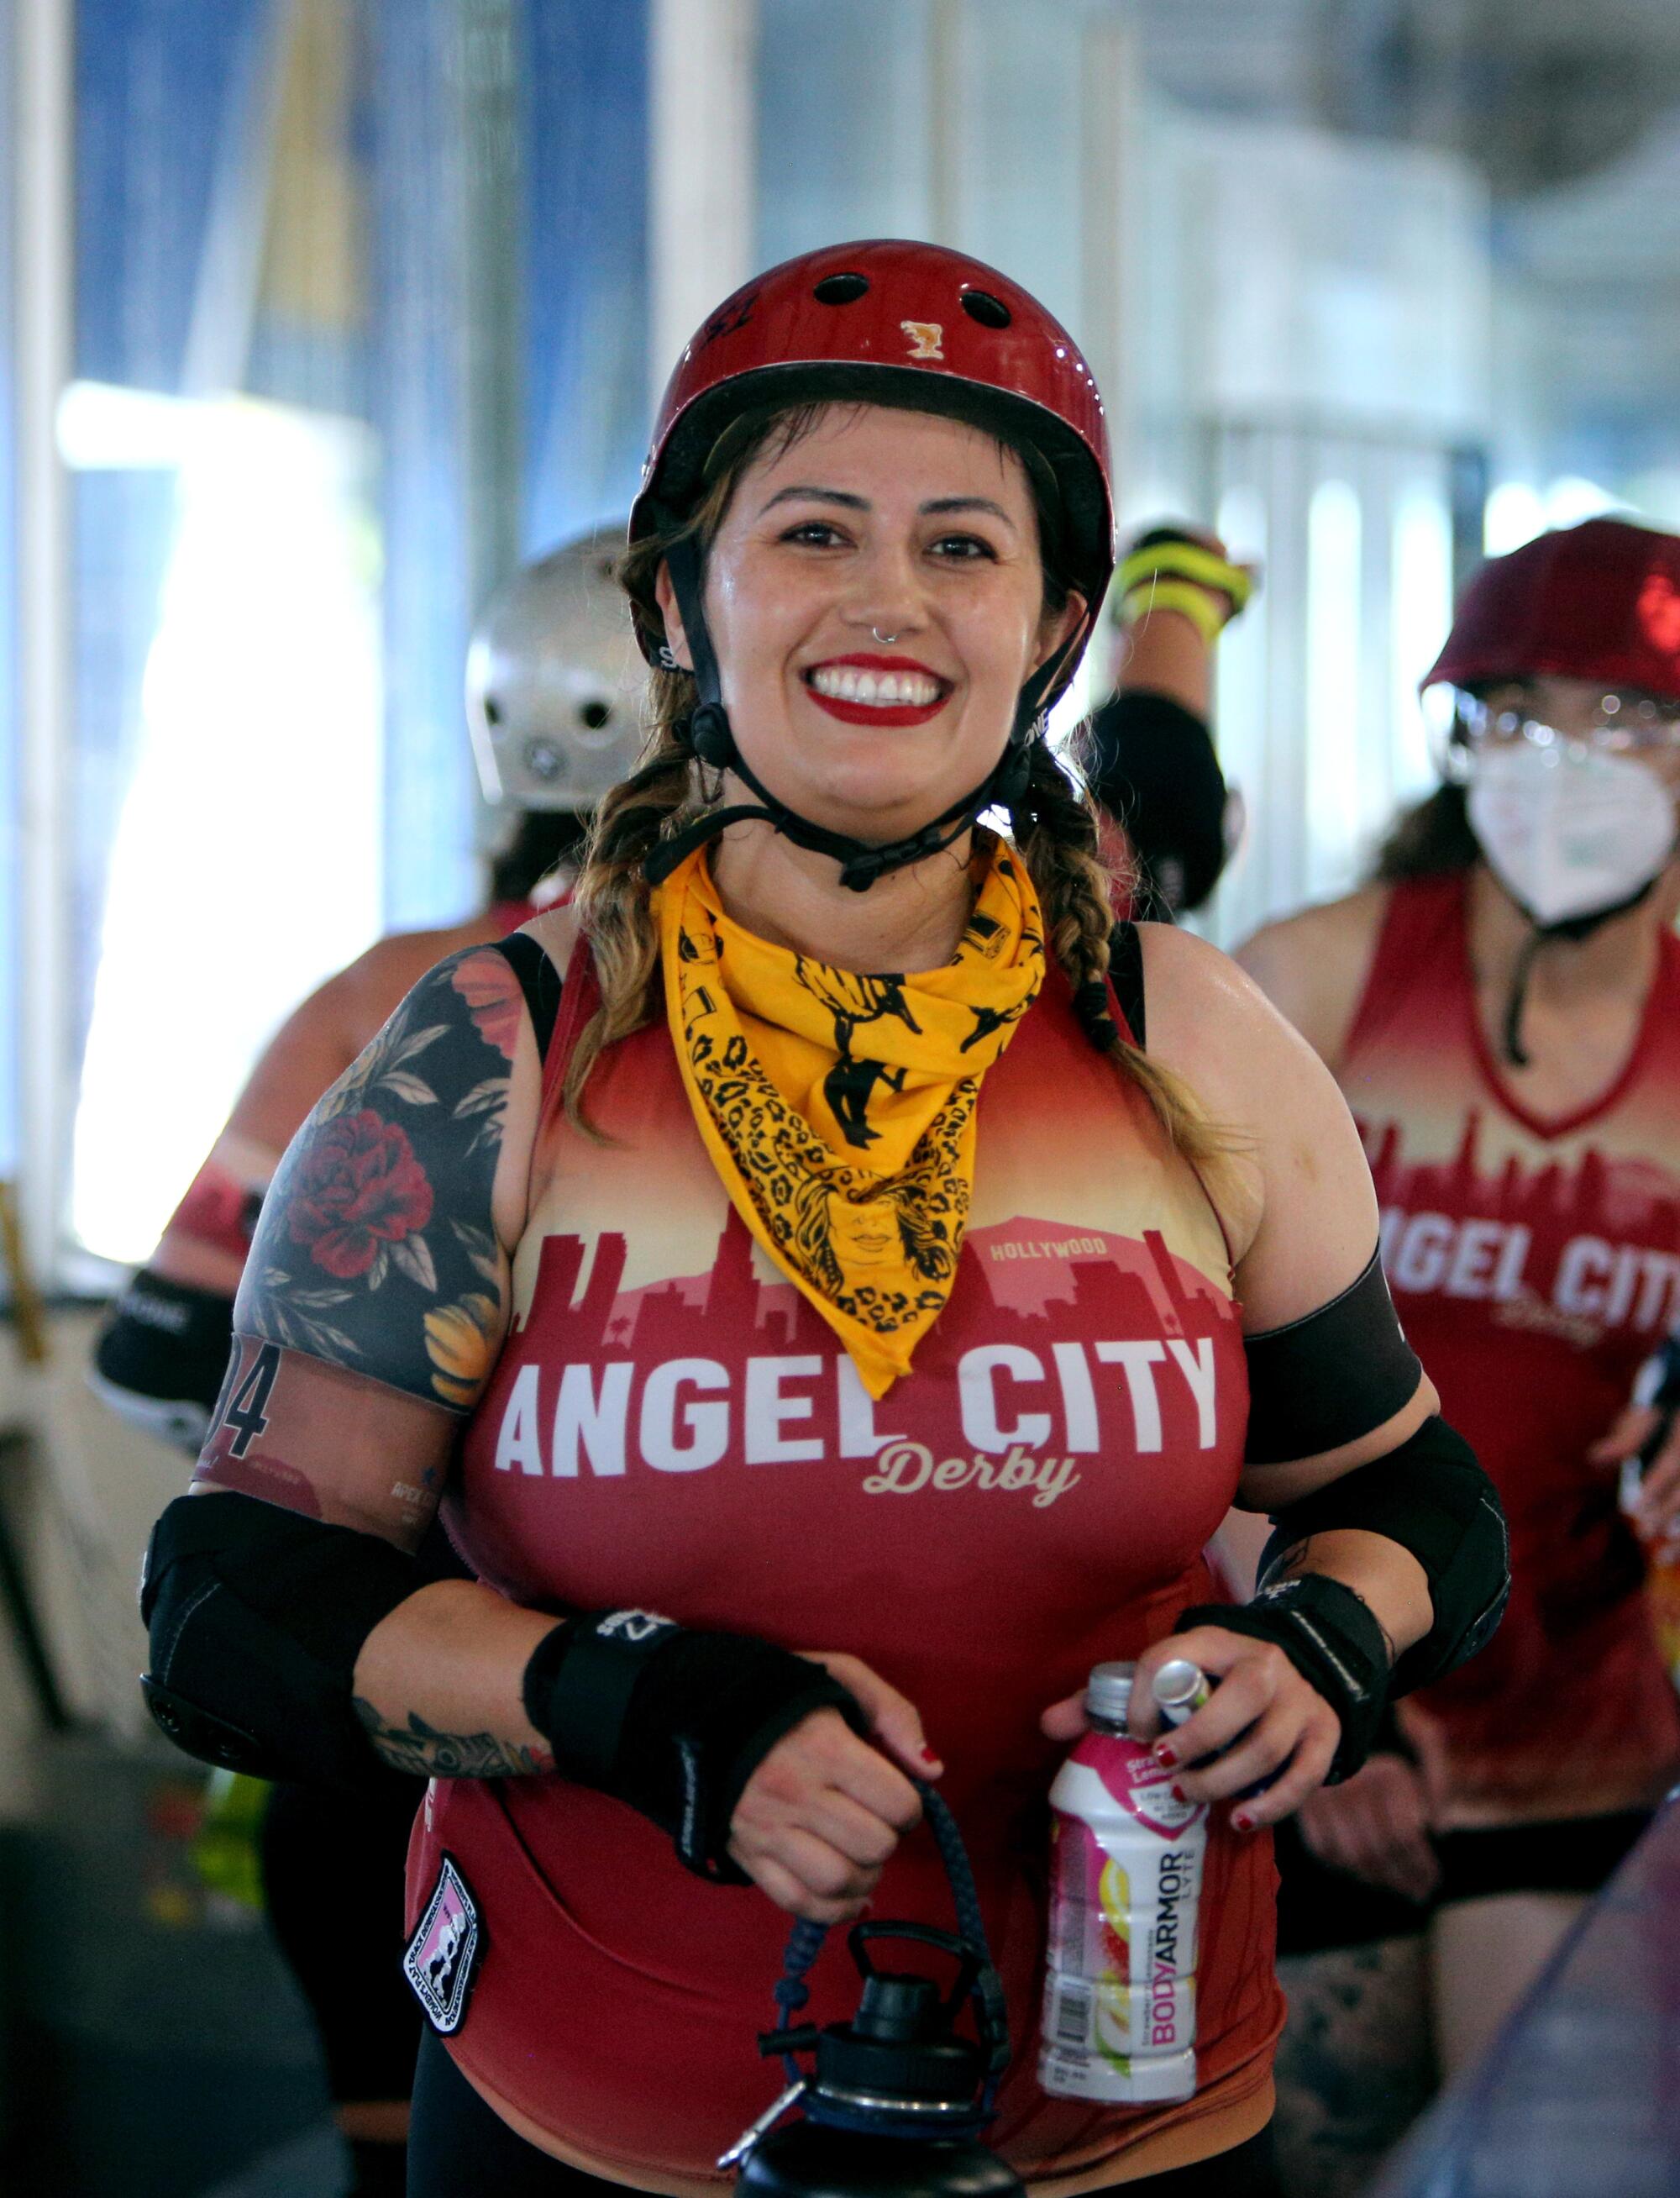 A woman wearing a helmet and elbow and wrist pads smiling